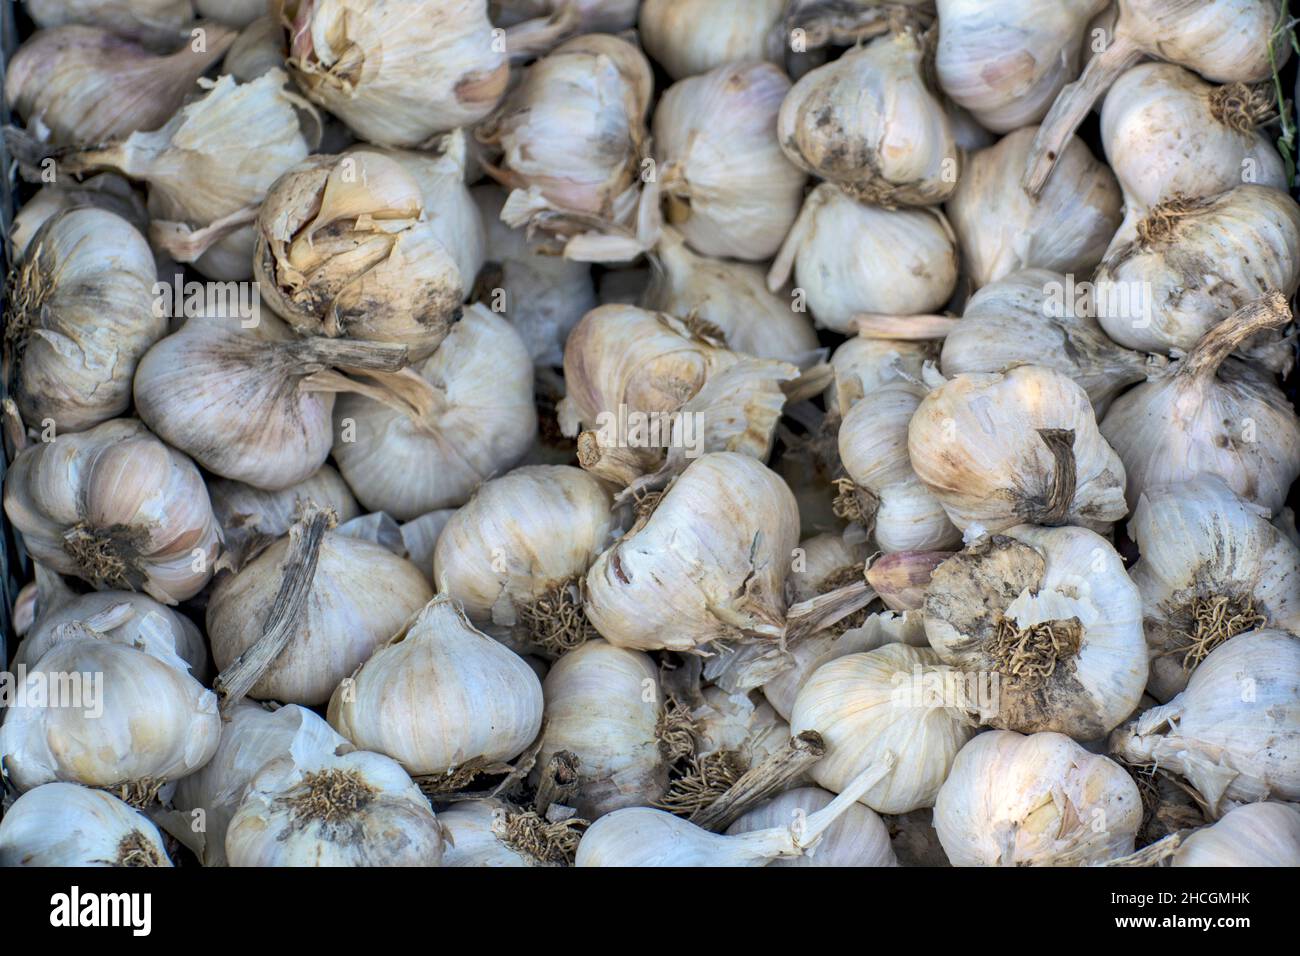 Selling garlic heads in a pile in a crate. Garlic is very healthy for human consumption. Stock Photo